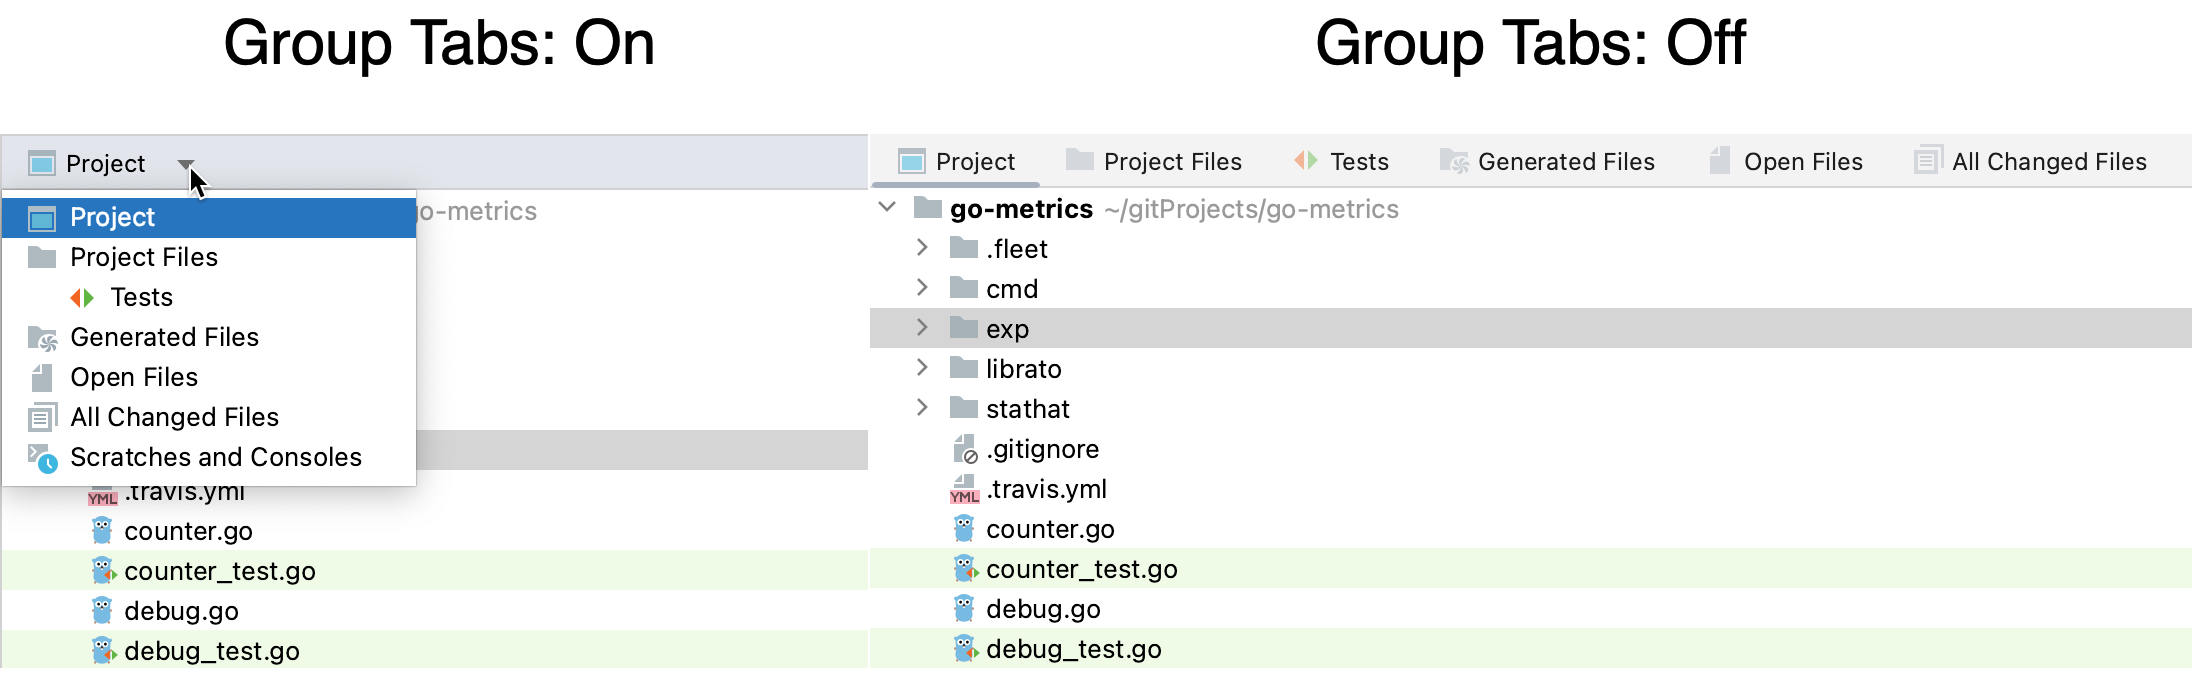 GoLand: choosing a view in the Project tool window